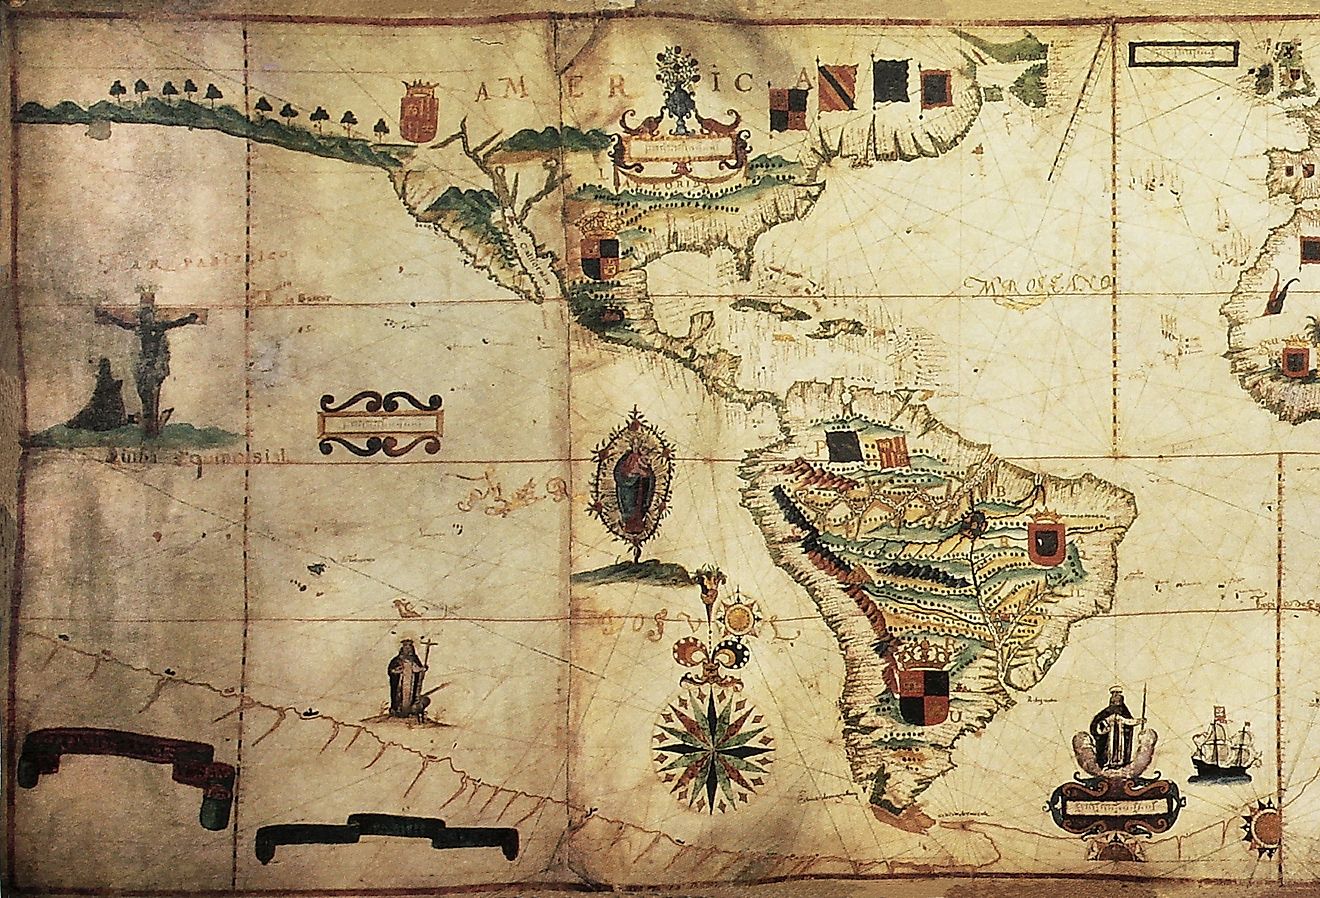 Antique world map of Spanish and Portuguese maritime and colonial empire. Created by Antonio Sanches, published in Portugal, 1623